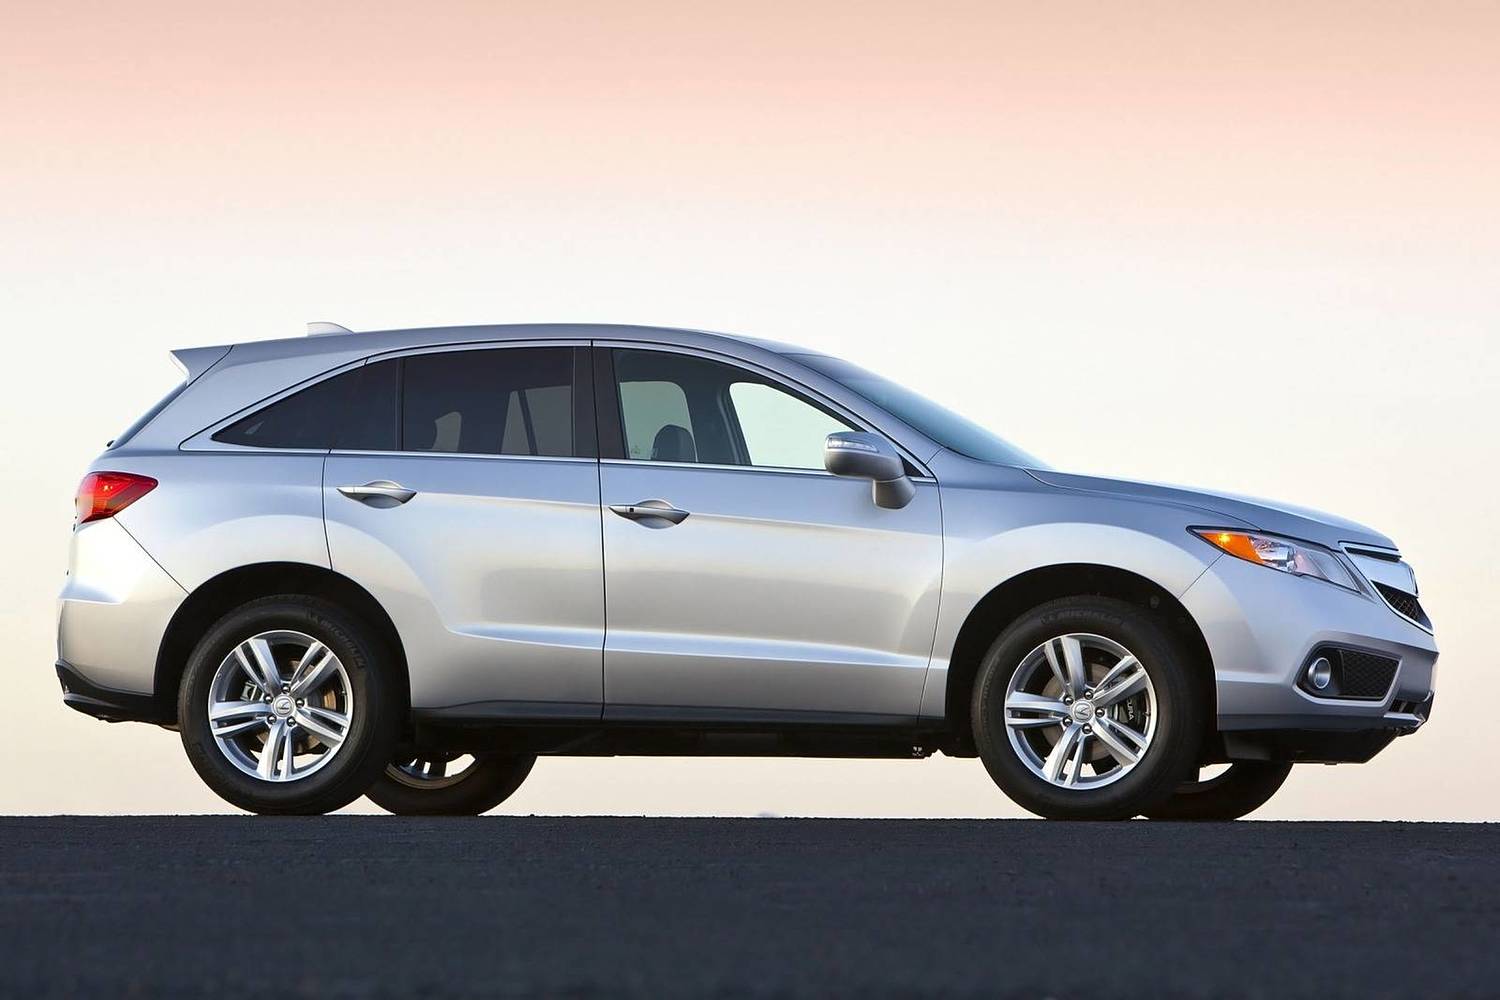 Acura RDX 4dr SUV Exterior (2014 model year shown)